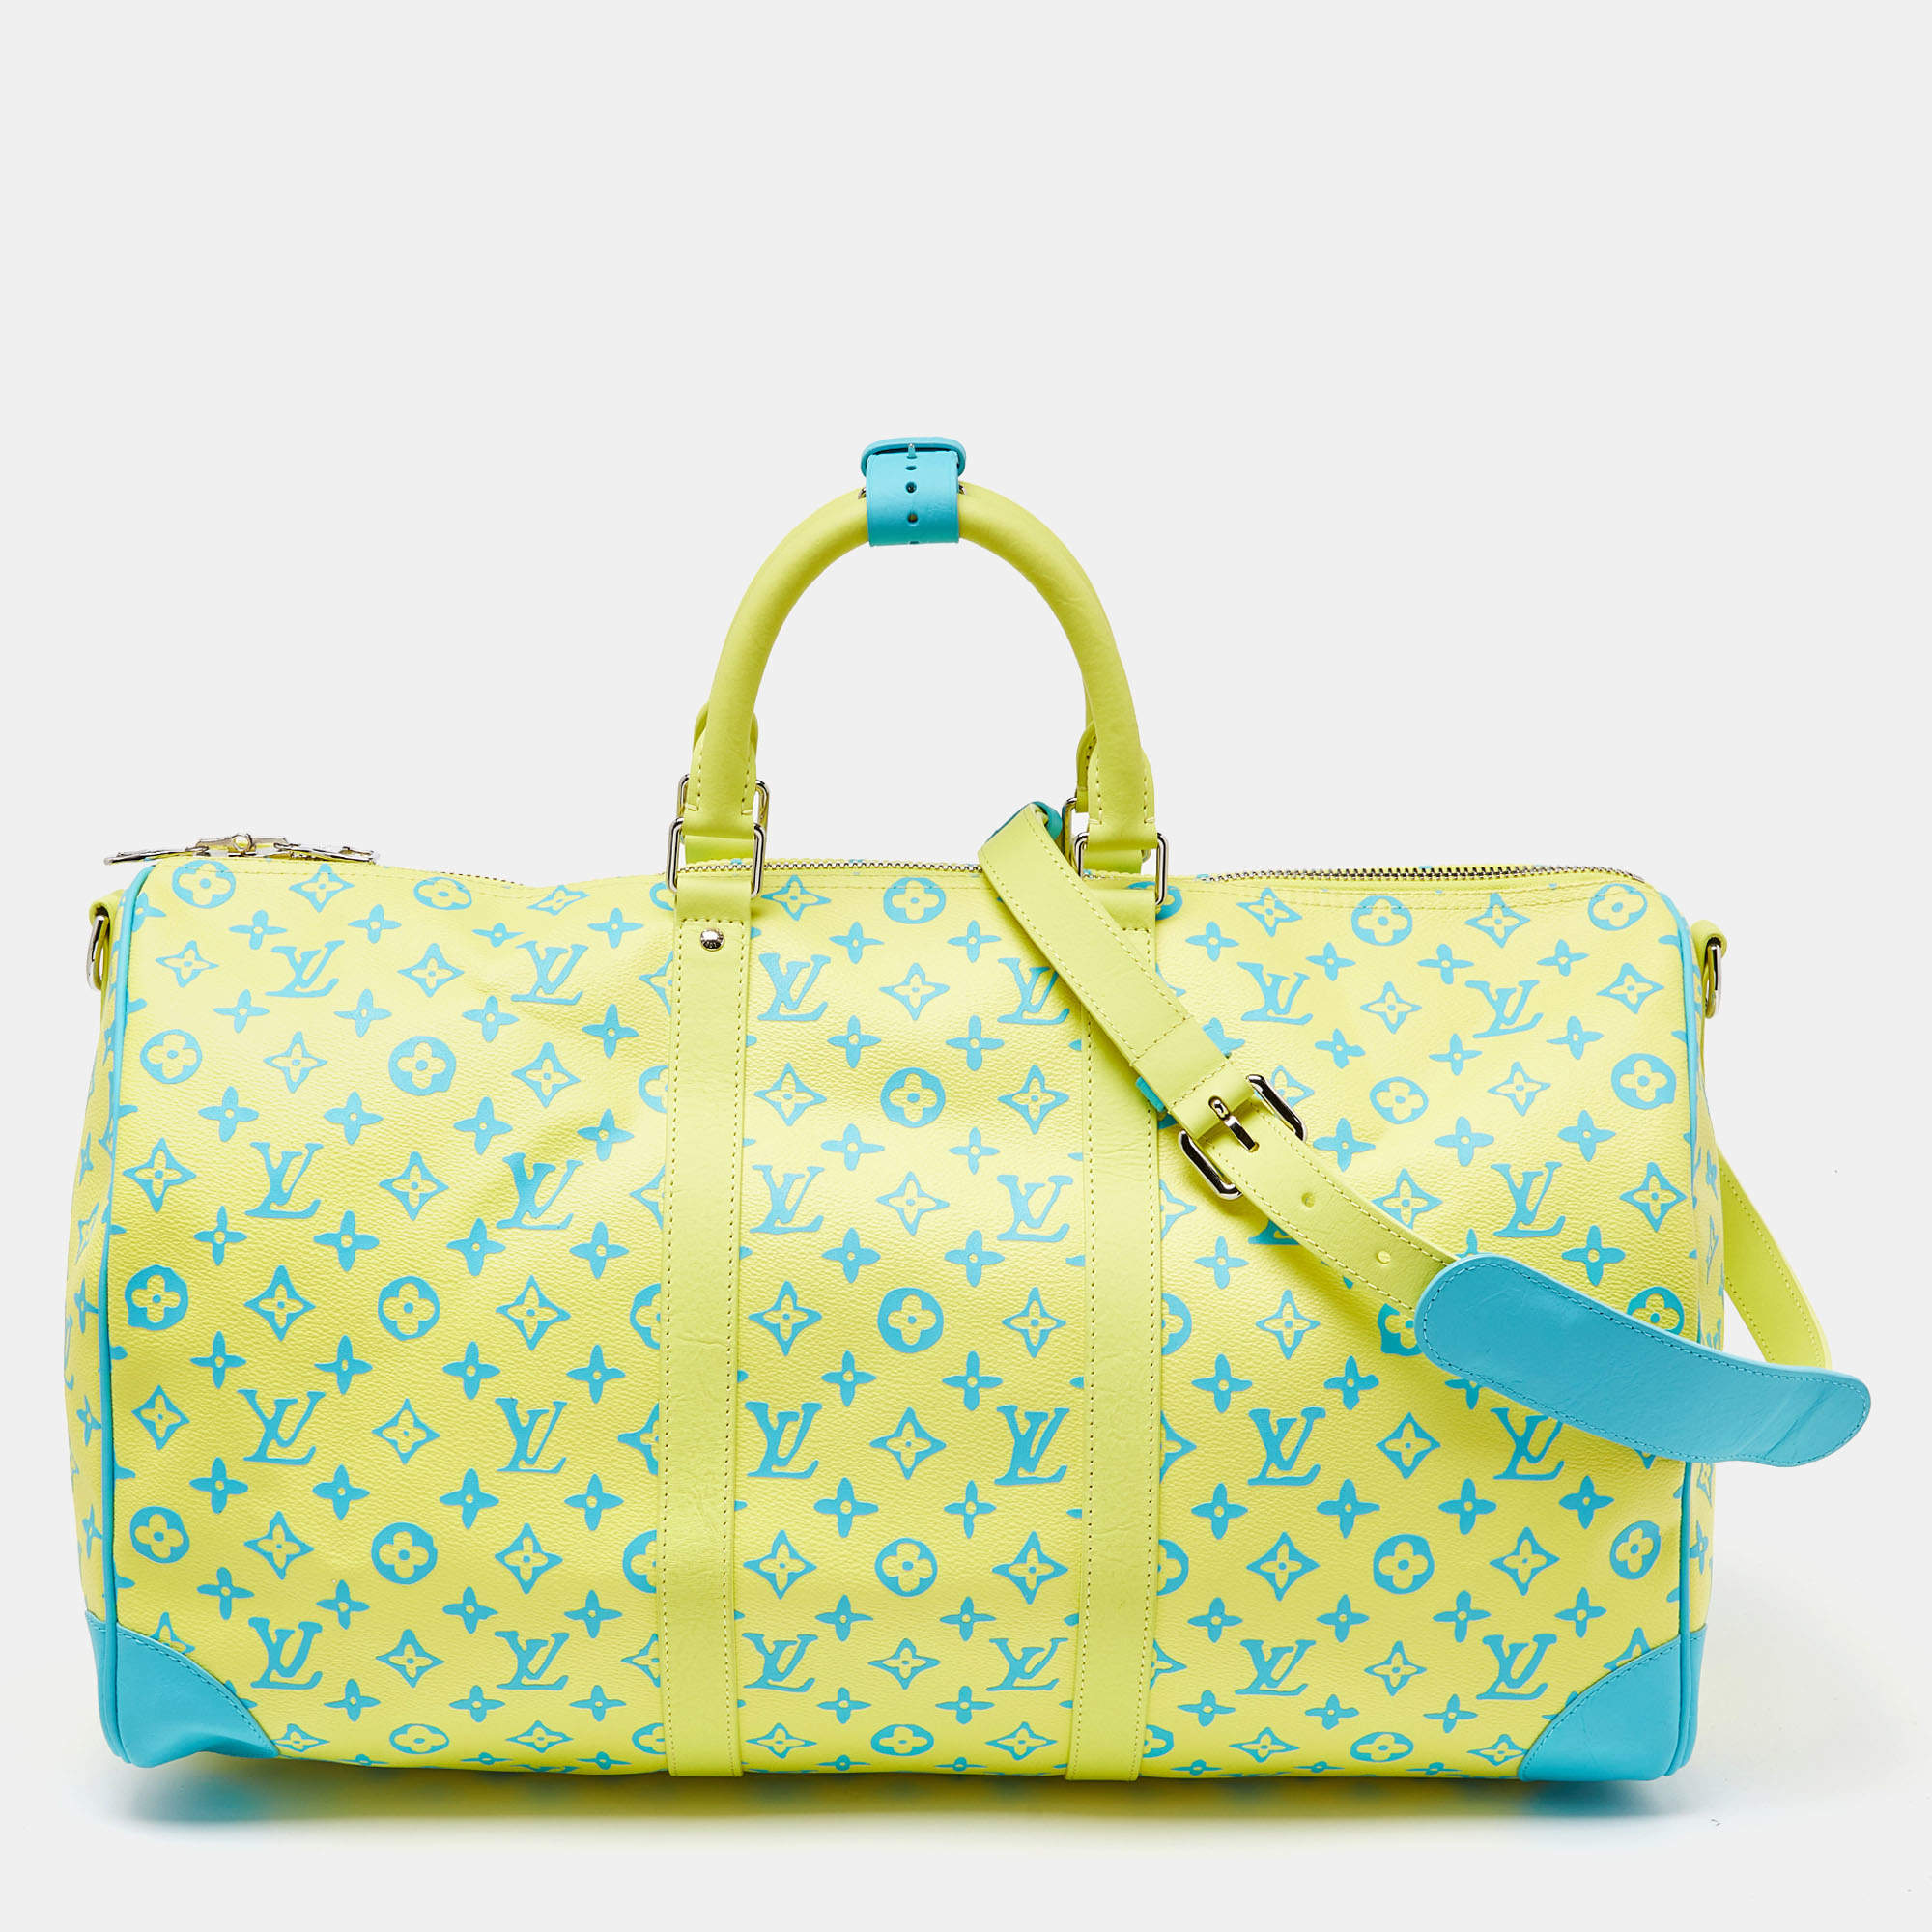 Louis Vuitton Keepall XS Monogram Yellow in Cowhide Leather - US